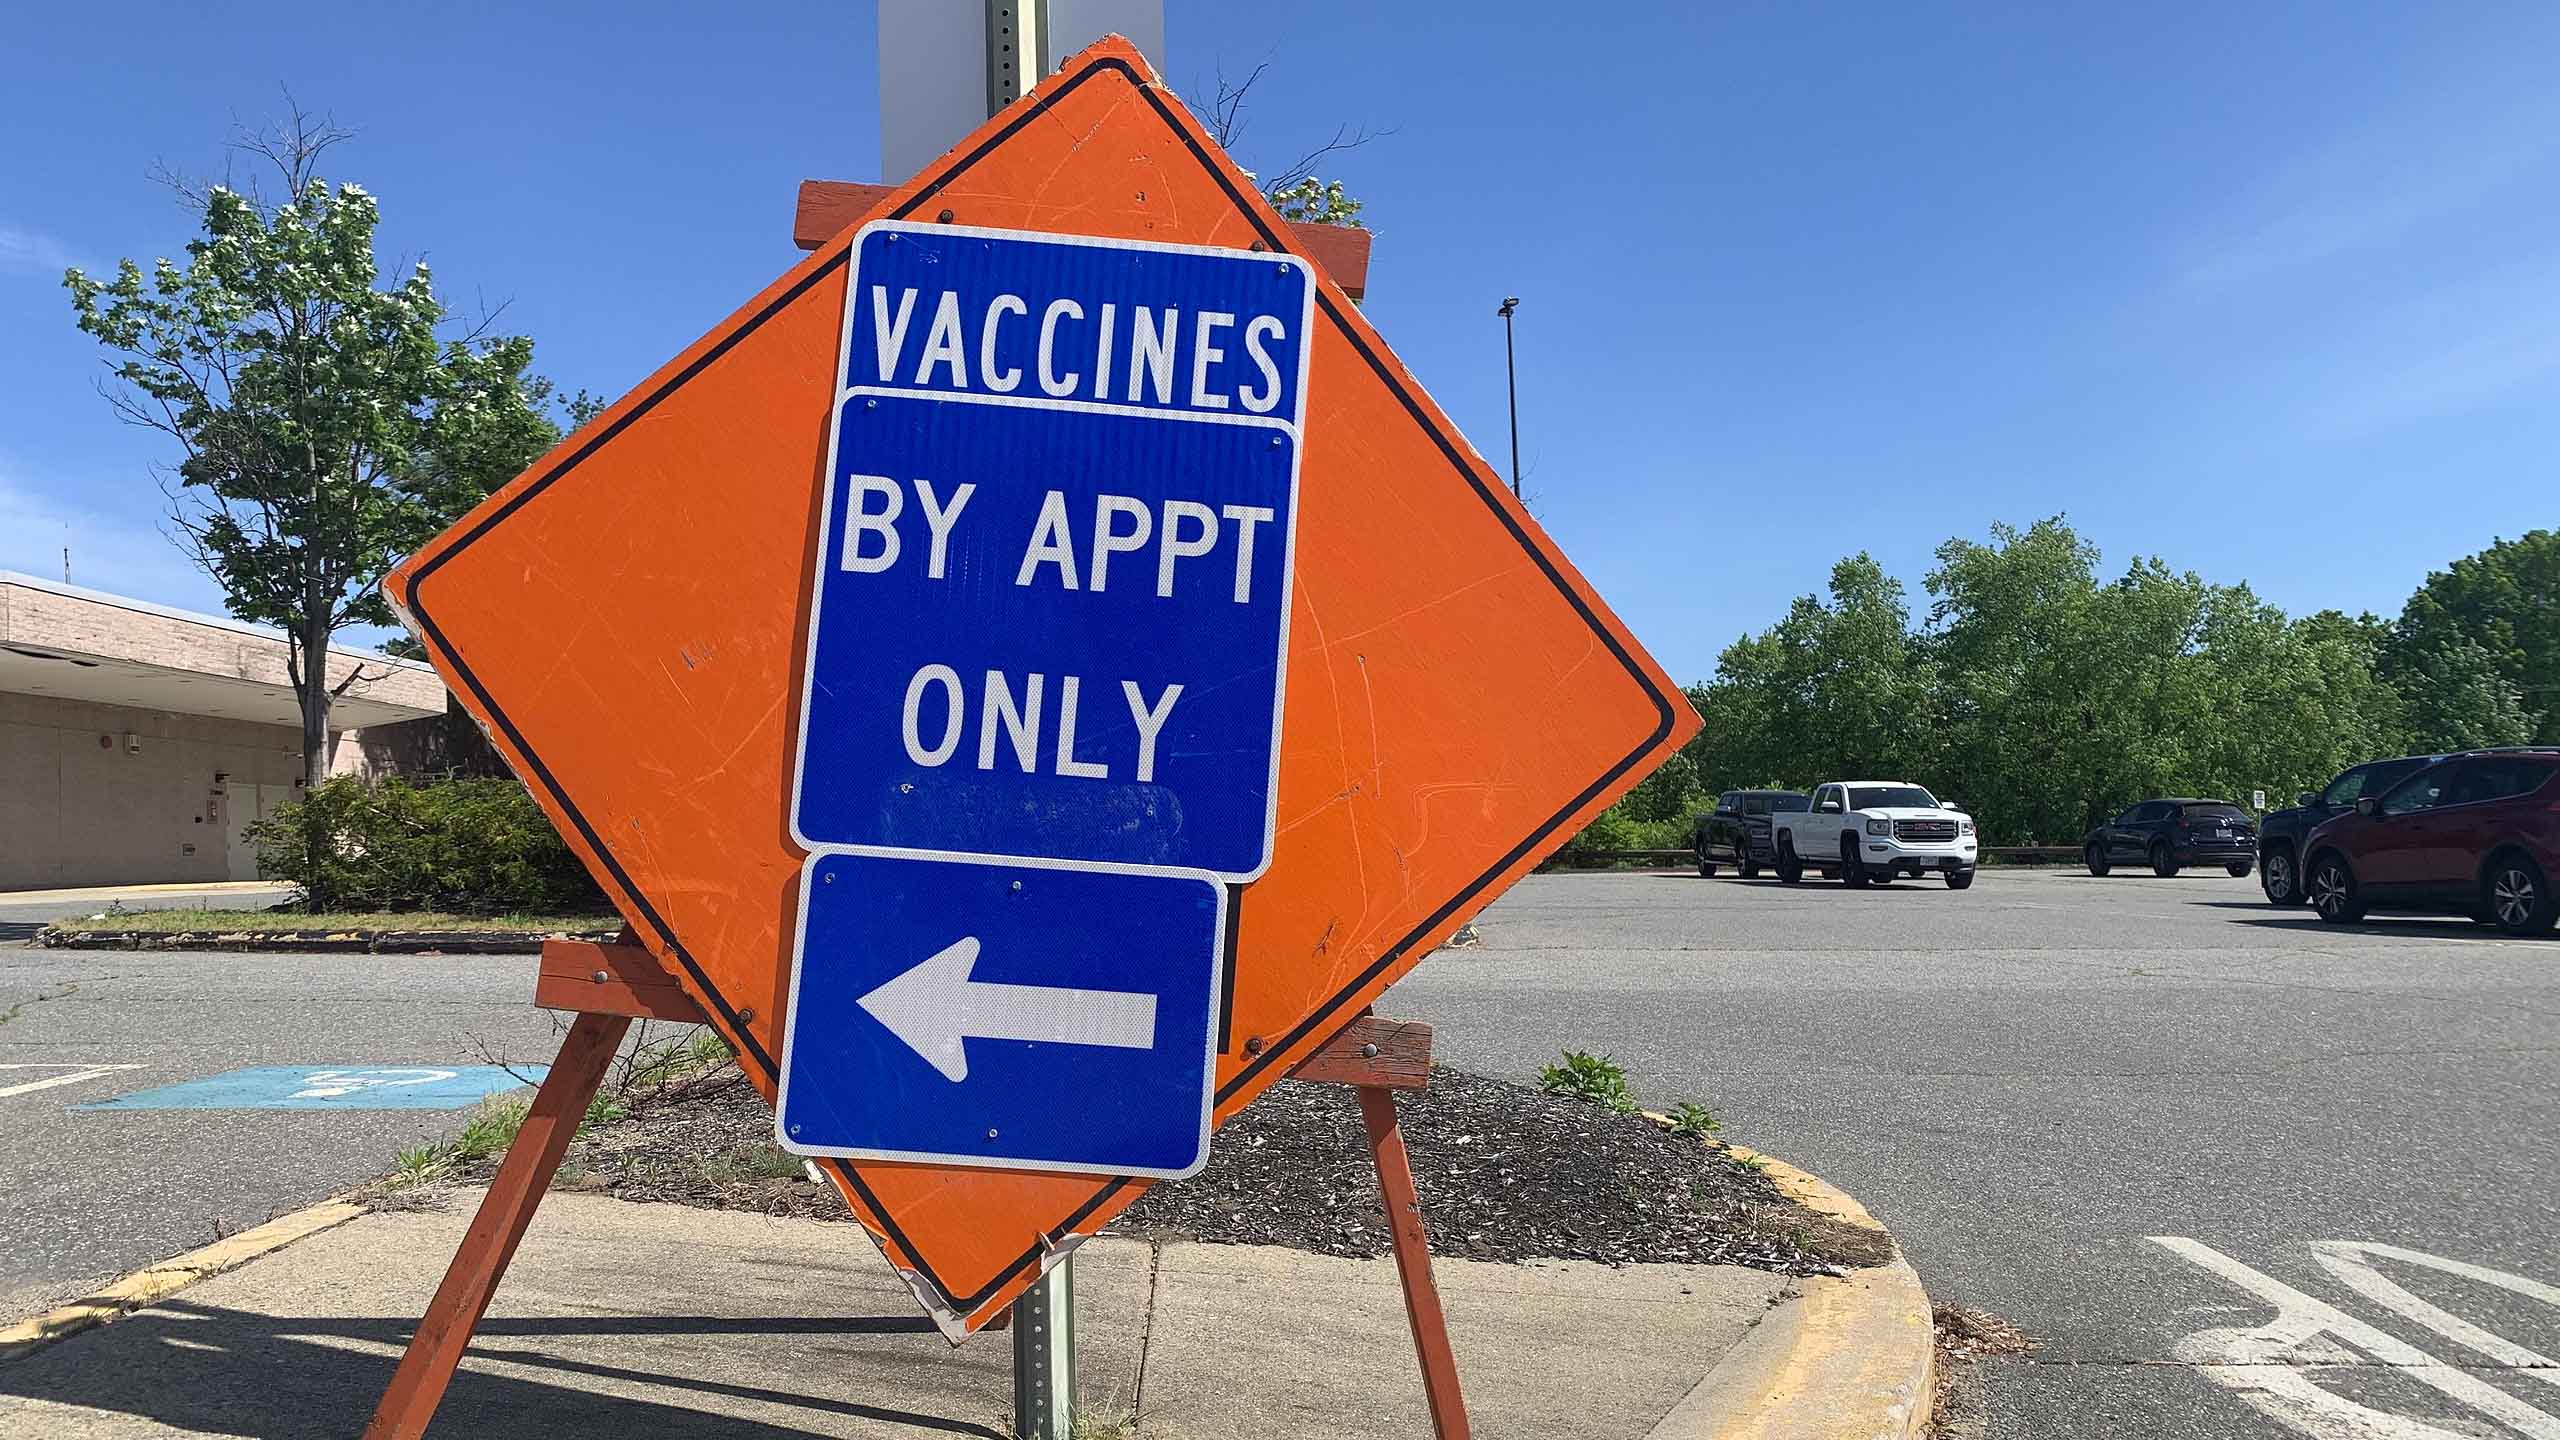 A sign advertising vaccines.